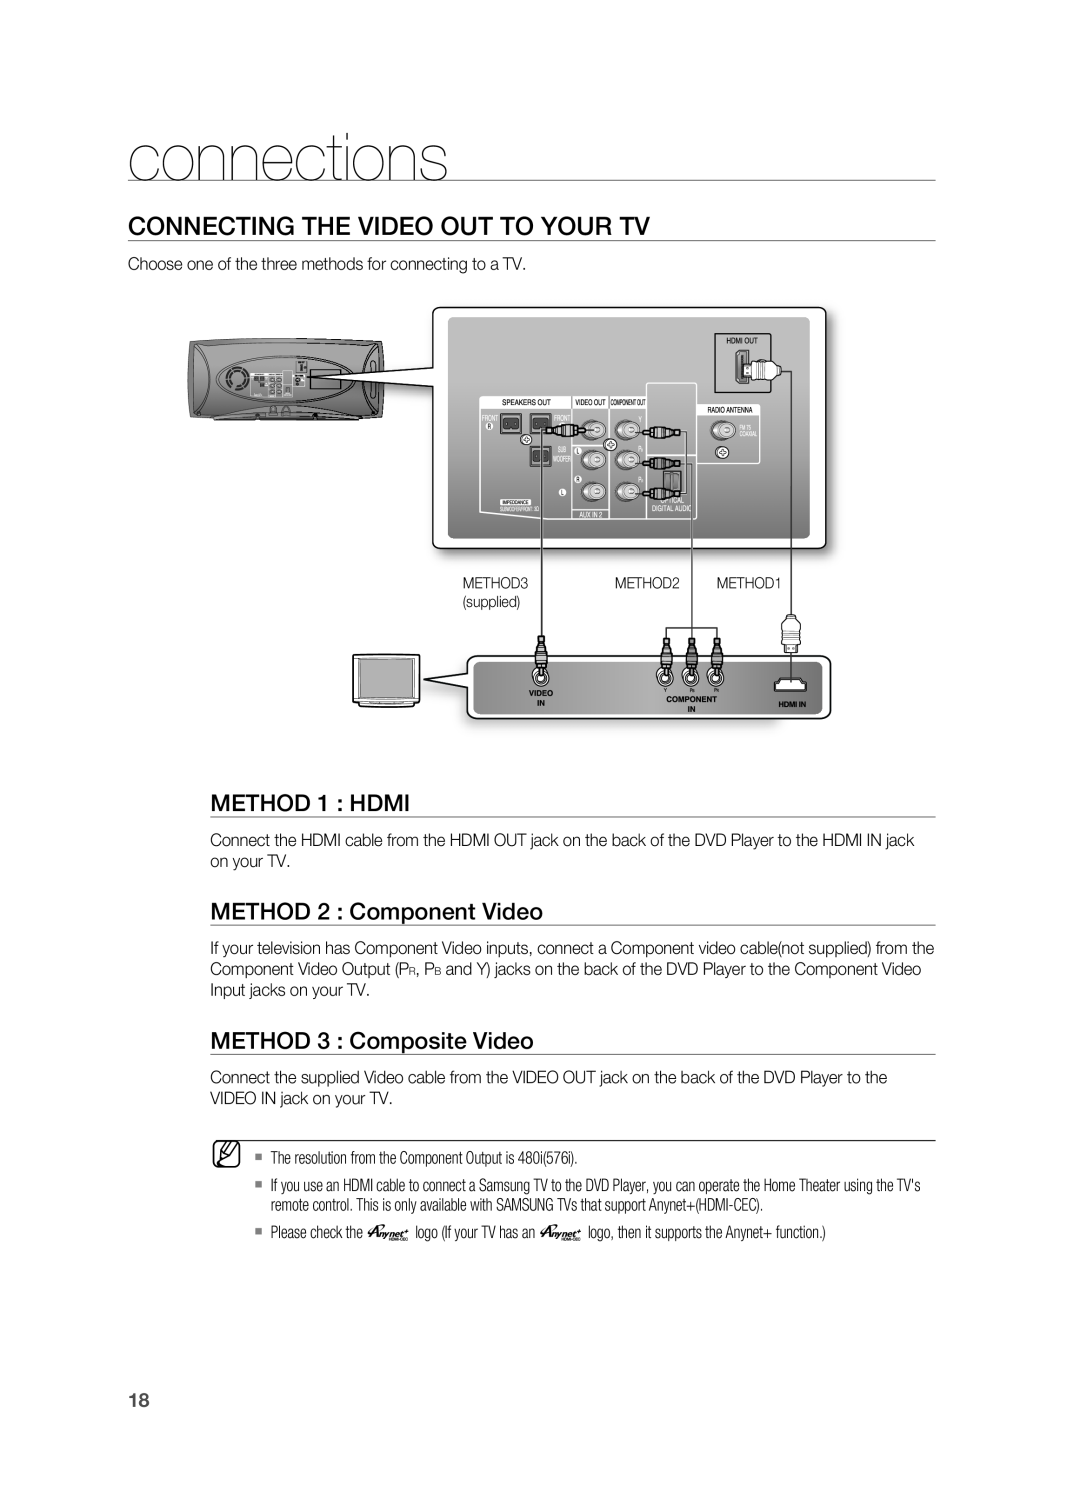 Samsung HT-A100 Connecting the Video Out to your TV, METHOD 1 HDMI, METHOD 2 Component Video, METHOD 3 Composite Video 